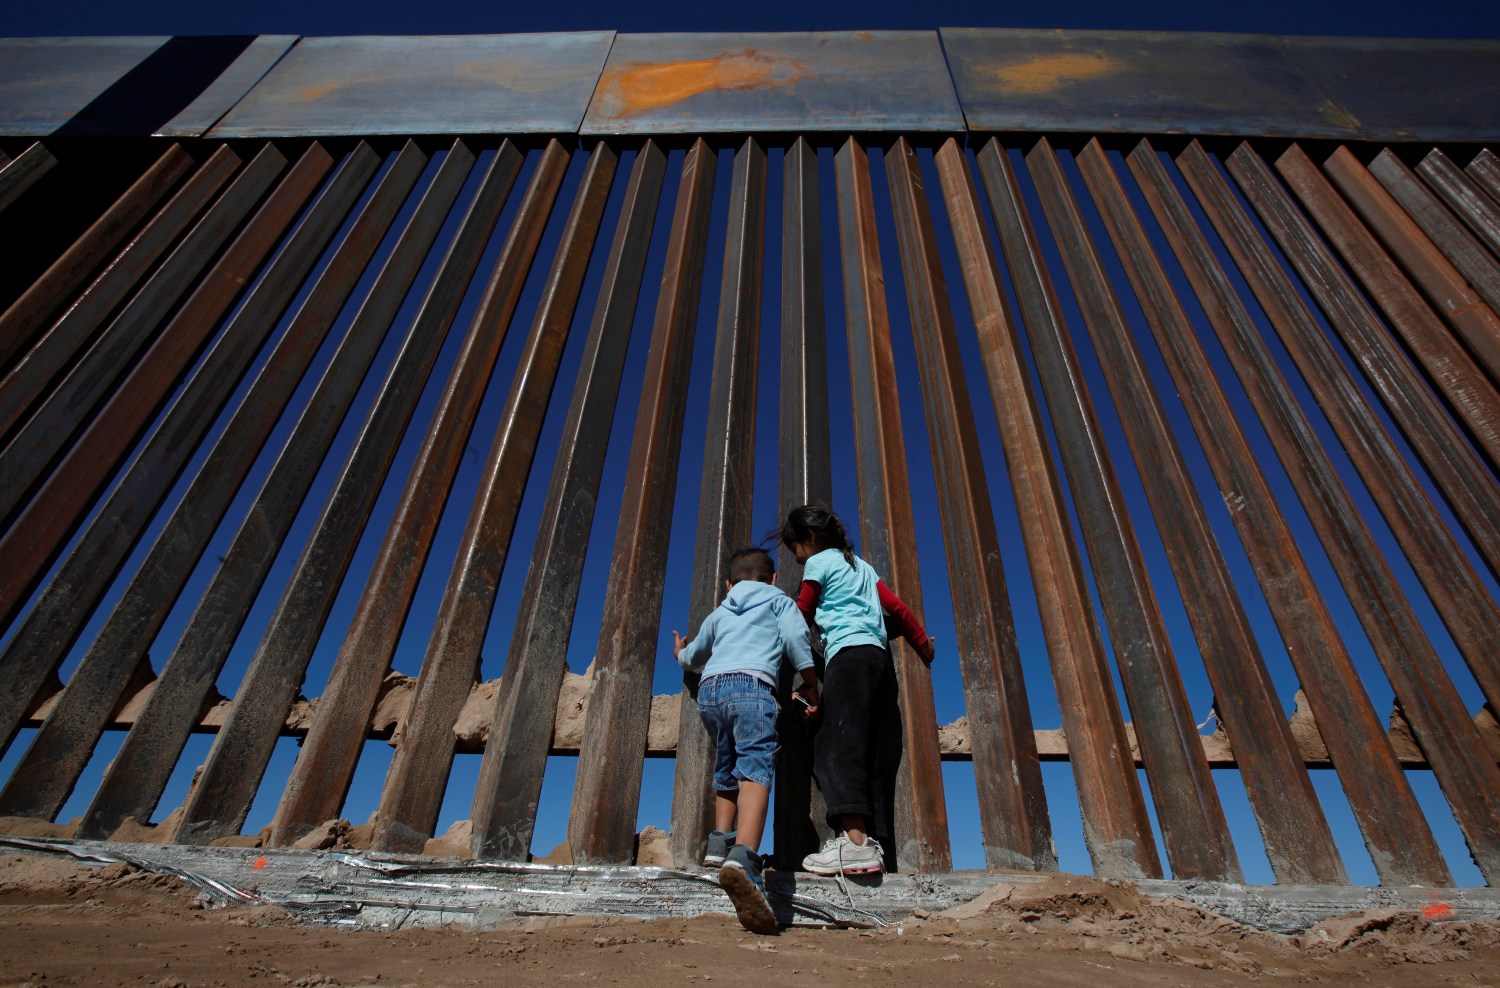 Children play at a newly built section of the U.S.-Mexico border wall at Sunland Park, U.S. opposite the Mexican border city of Ciudad Juarez, Mexico November 18, 2016. Picture taken from the Mexico side of the U.S.-Mexico border. Picture taken November 18, 2016. REUTERS/Jose Luis Gonzalez - RC13C47E2660